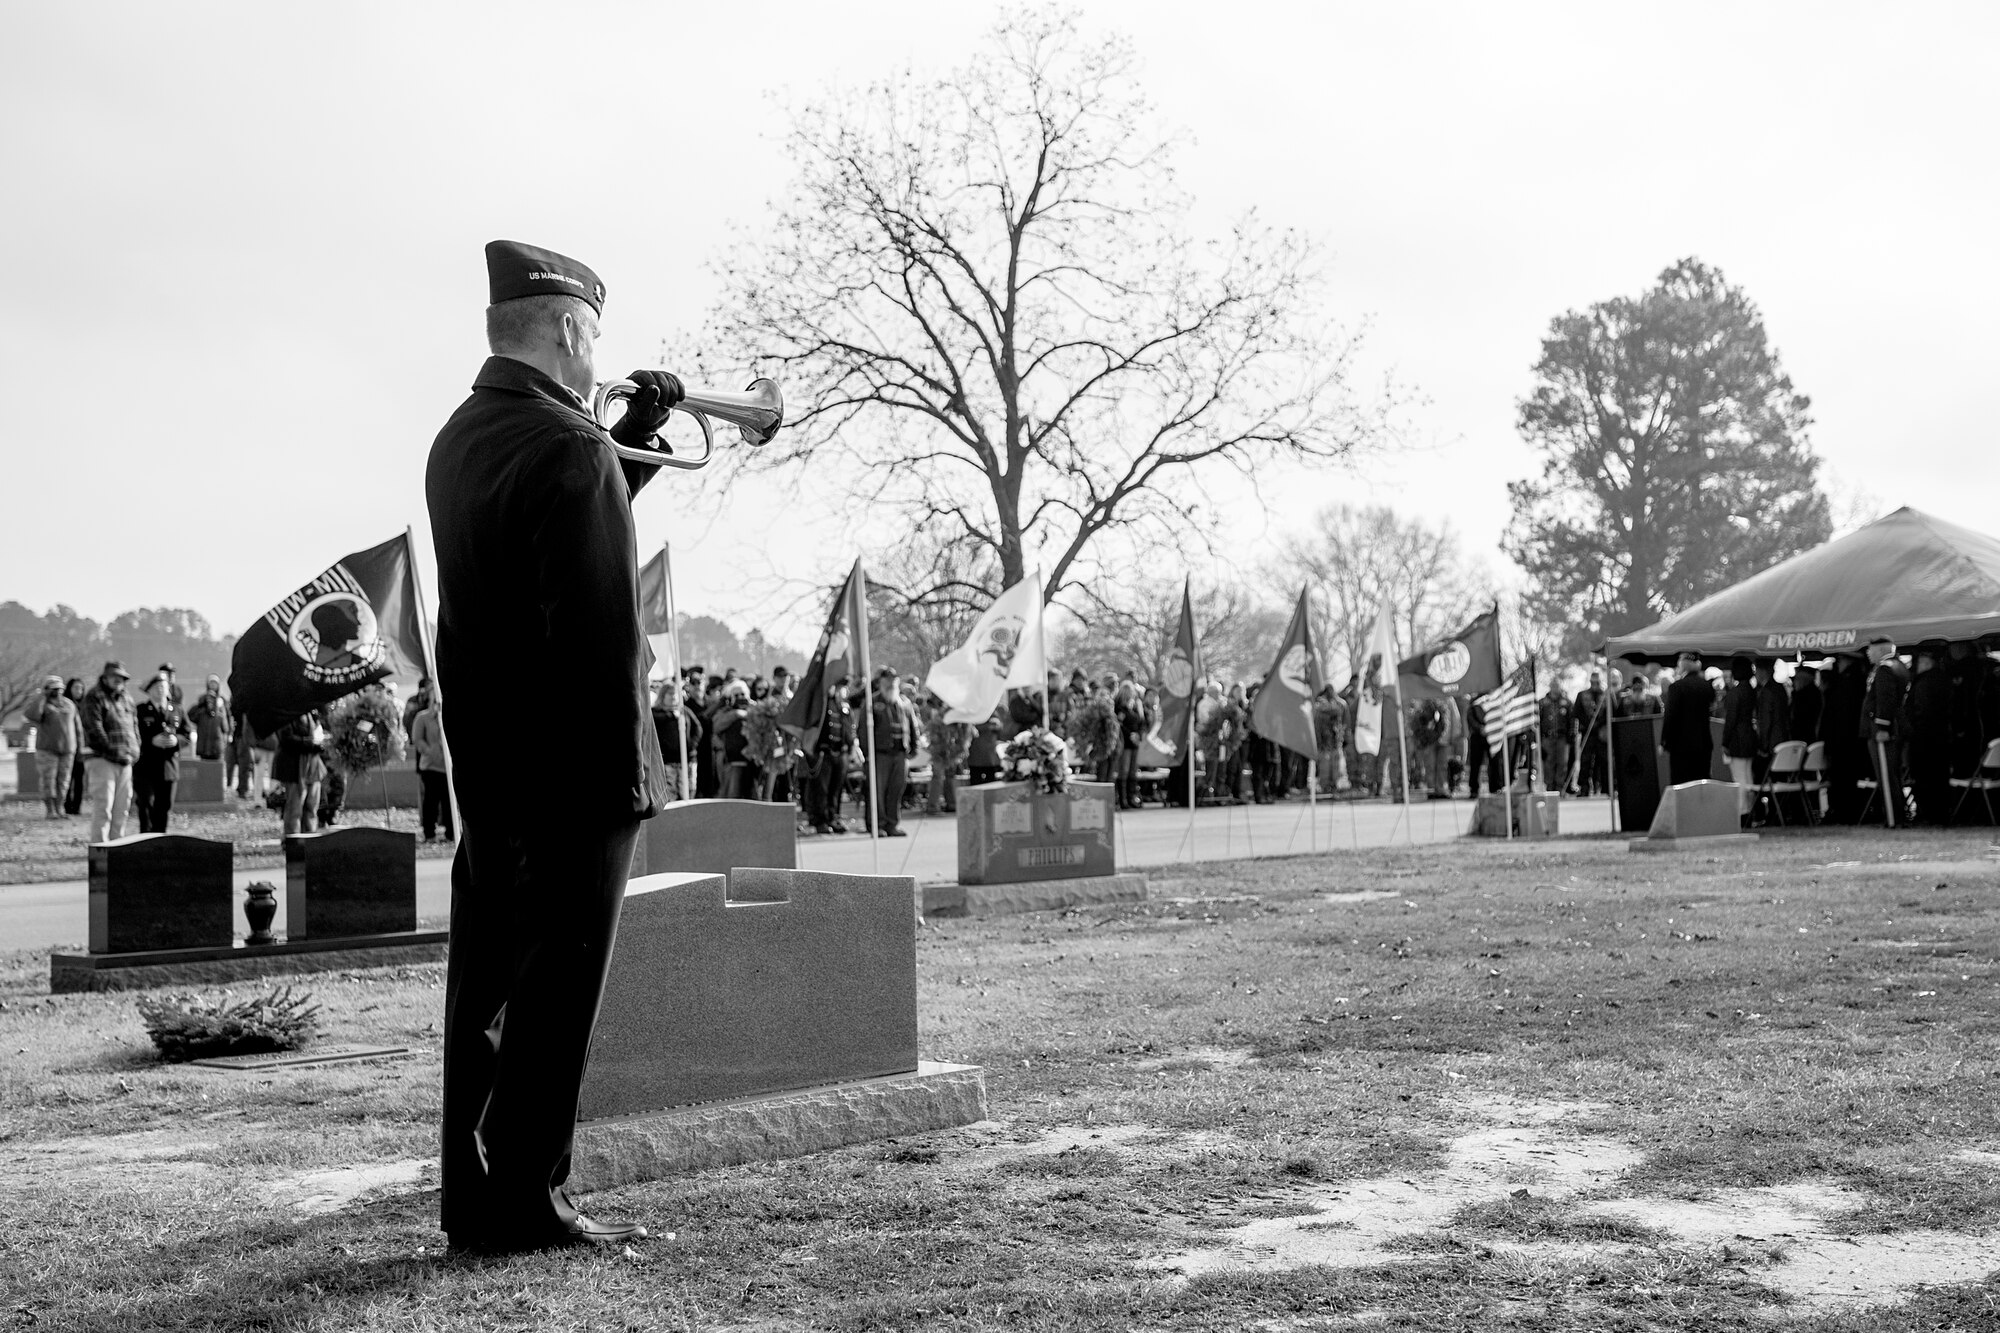 A lone bugle player plays taps to sound the end of a Wreaths Across America ceremony, Dec. 17, 2016, at Evergreen Memorial Cemetery in Princeton, North Carolina. More than 200 people attended the ceremony with over 50 volunteers from Seymour Johnson Air Force Base, North Carolina helping with the ceremony and laying of the 500 wreaths. (U.S. Air Force photo by Airman Shawna L. Keyes)